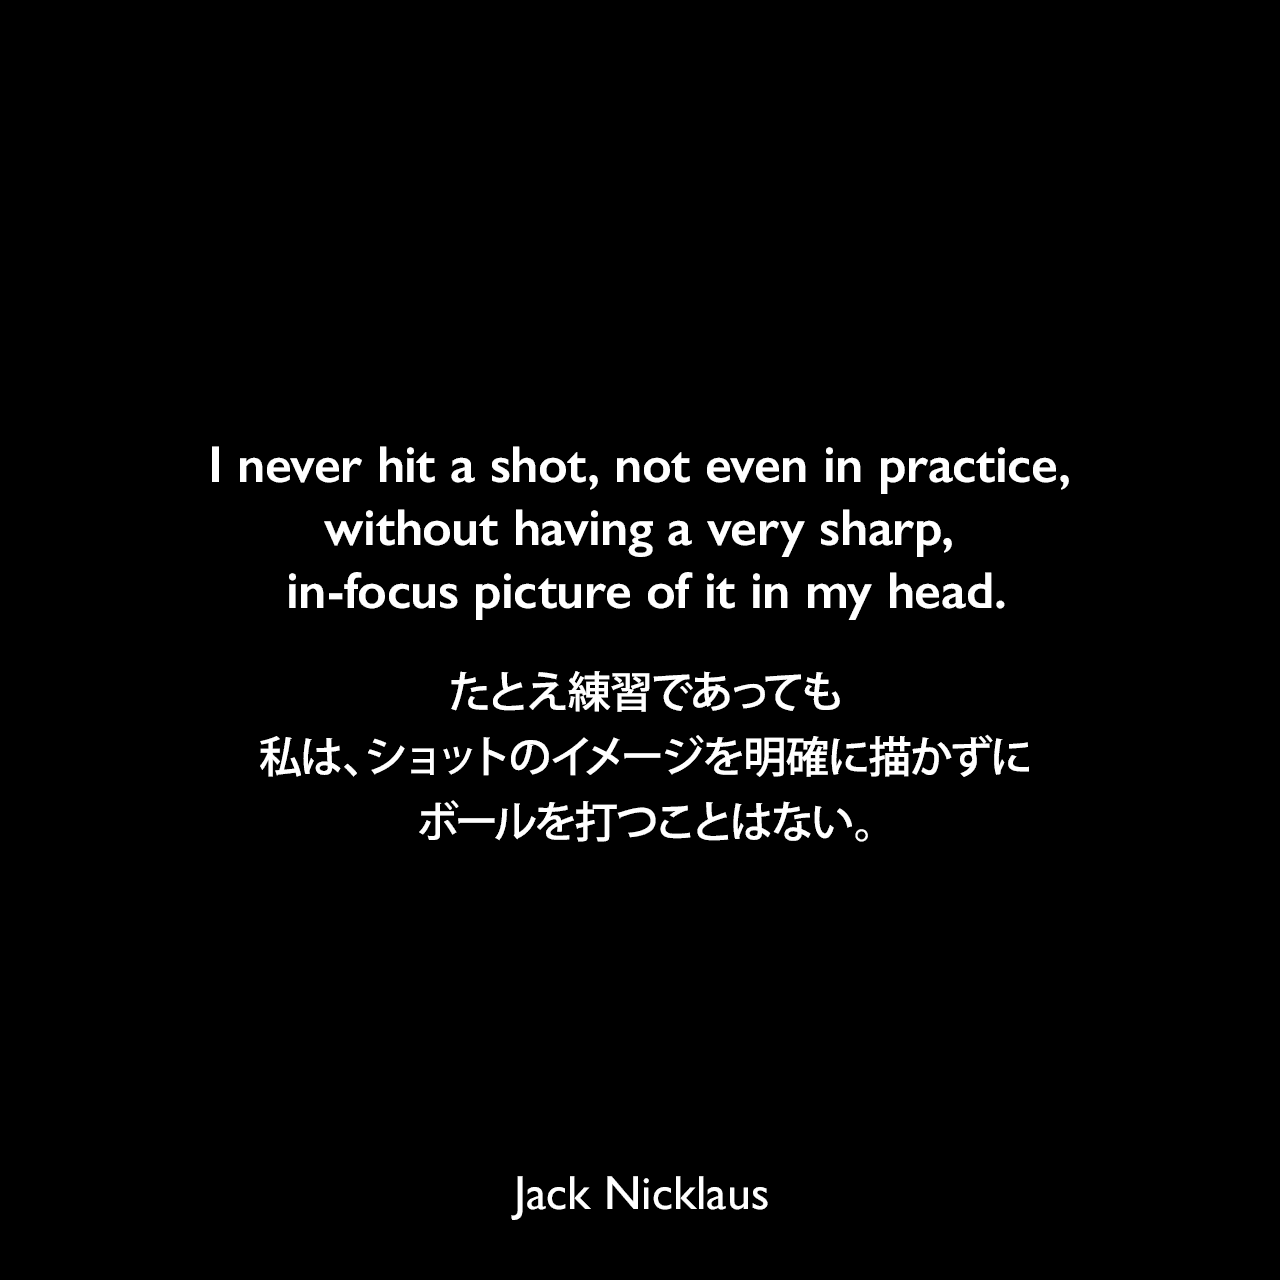 I never hit a shot, not even in practice, without having a very sharp, in-focus picture of it in my head.たとえ練習であっても、私は、ショットのイメージを明確に描かずにボールを打つことはない。Jack Nicklaus